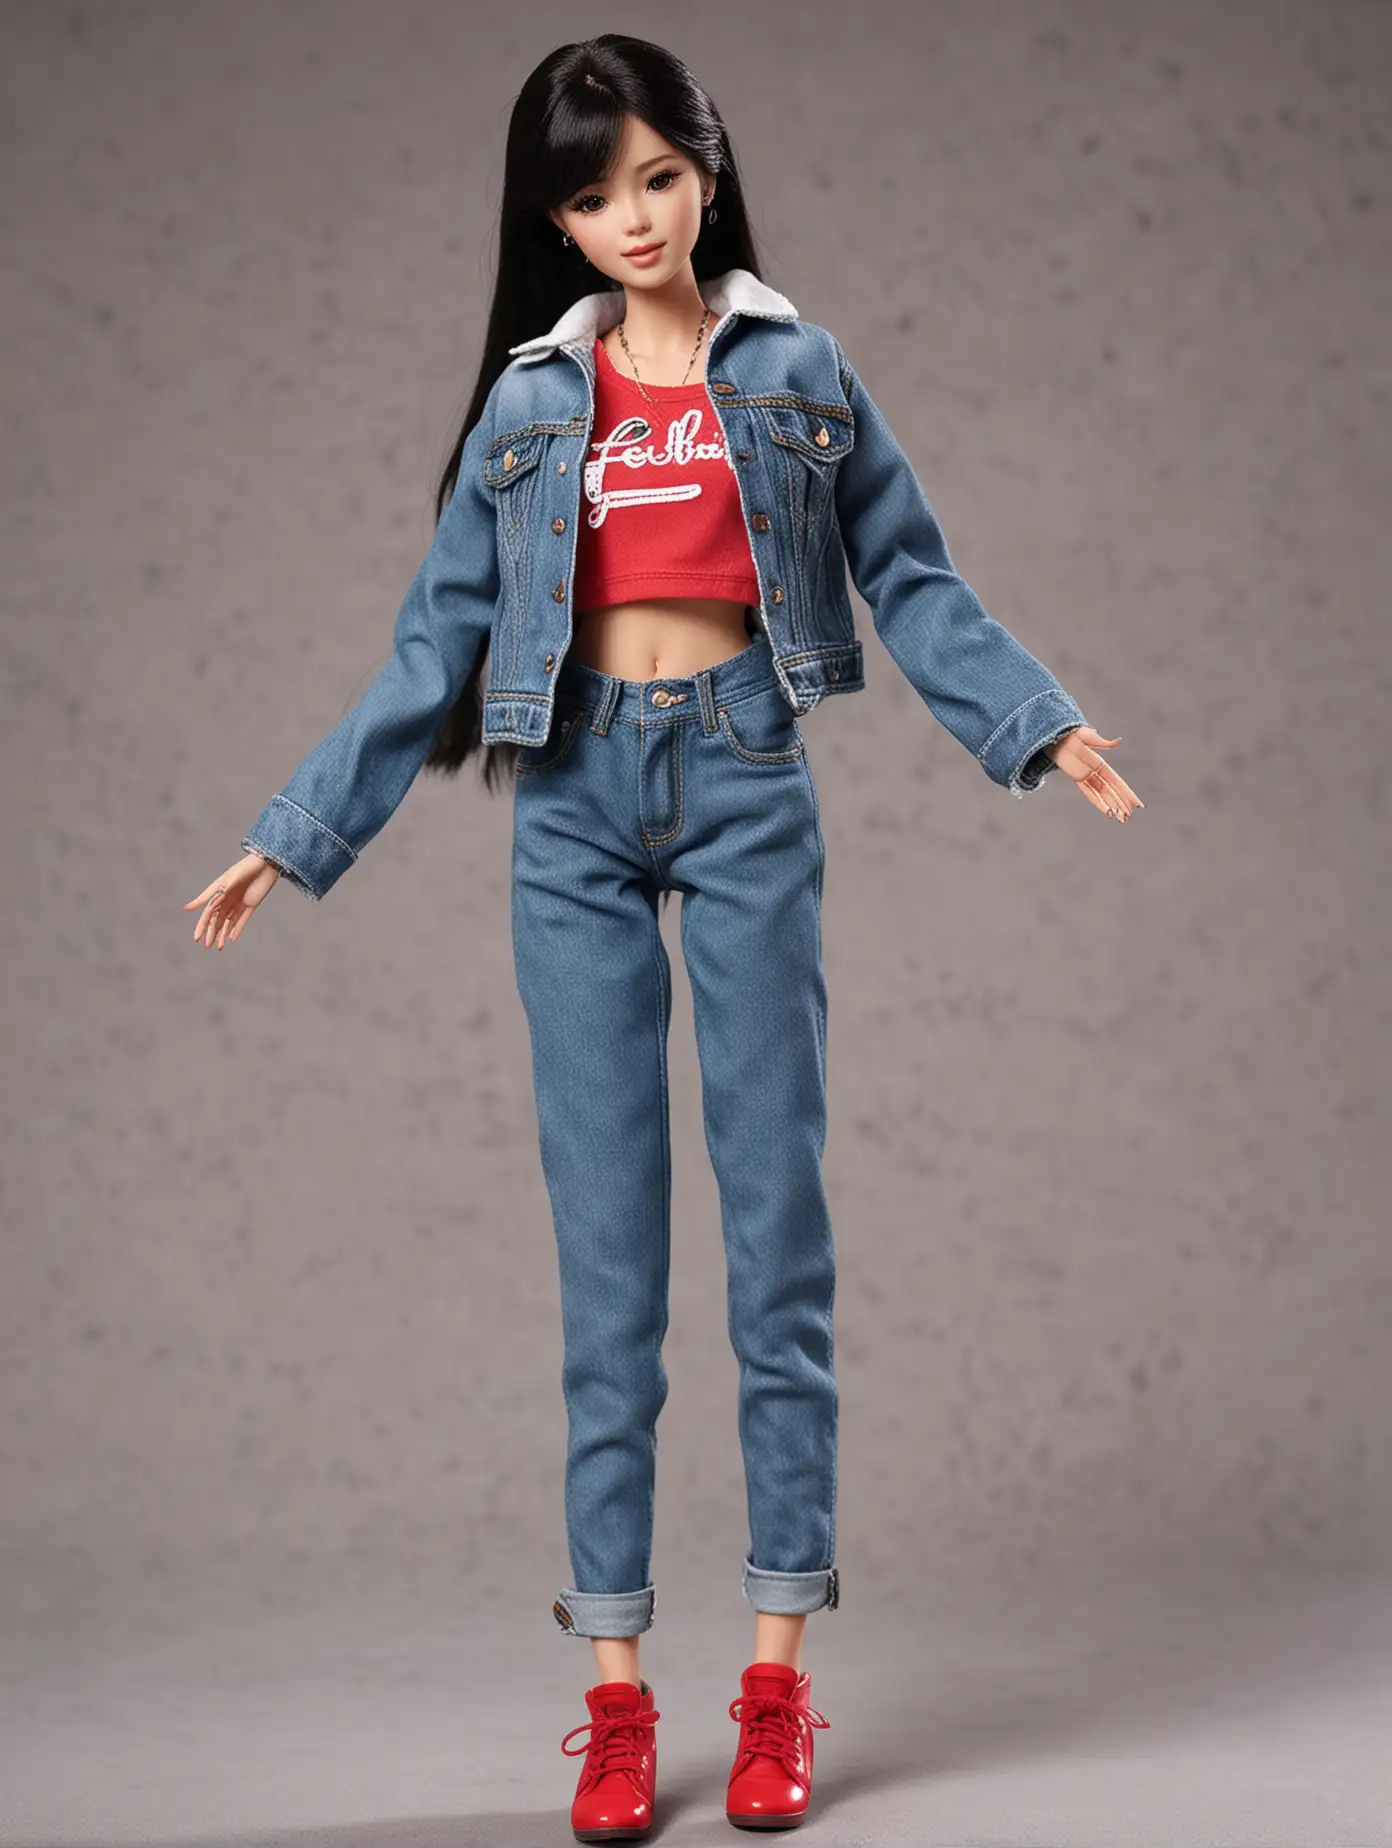 Beautiful teenage Kim Hye-yoon Barbie doll. height 140CM. Black hair. wearing a Levis jacket, Levis pants. Red Shoes. 2 finger pose. funny